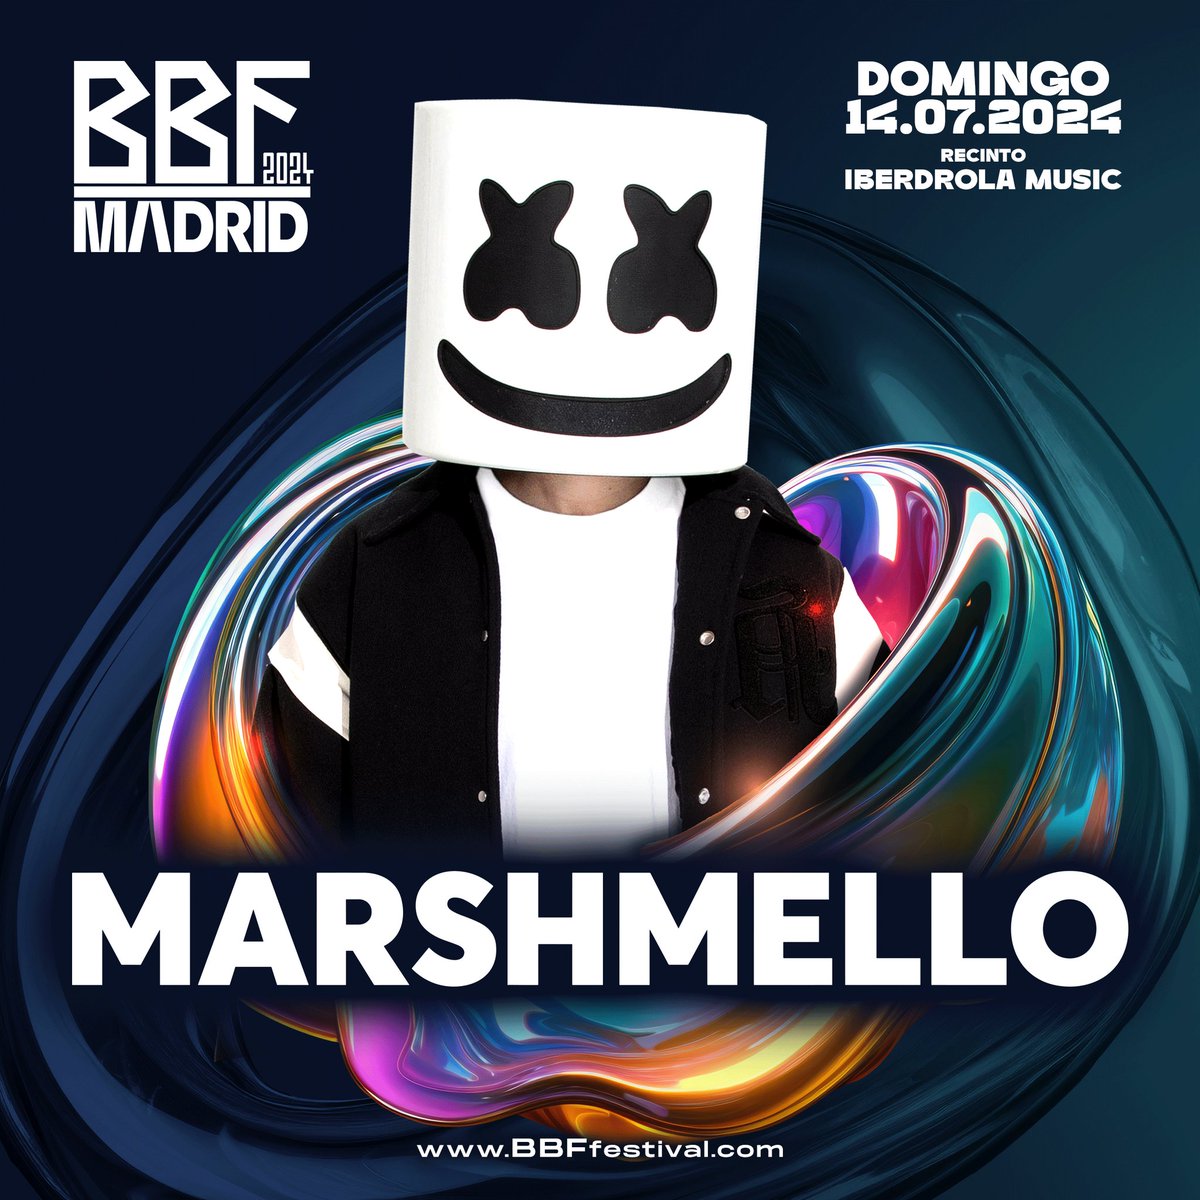 Promotion photo of the @BBFfestival festival for the @marshmello show for July 14 in Madrid (Spain)